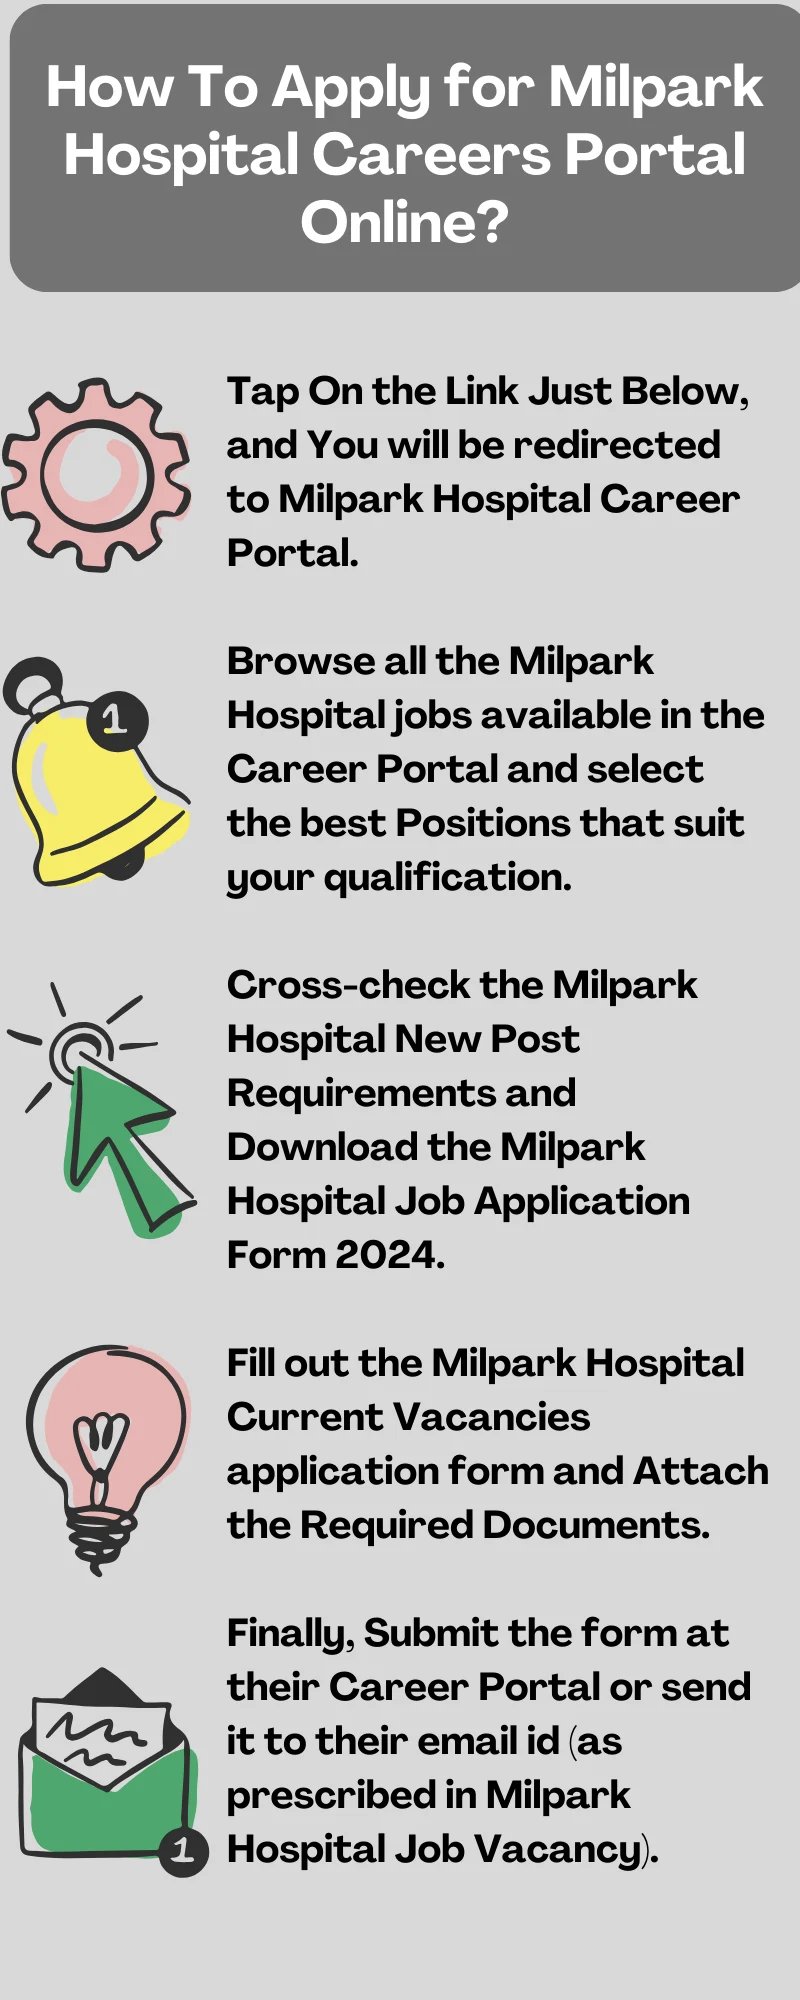 How To Apply for Milpark Hospital Careers Portal Online?